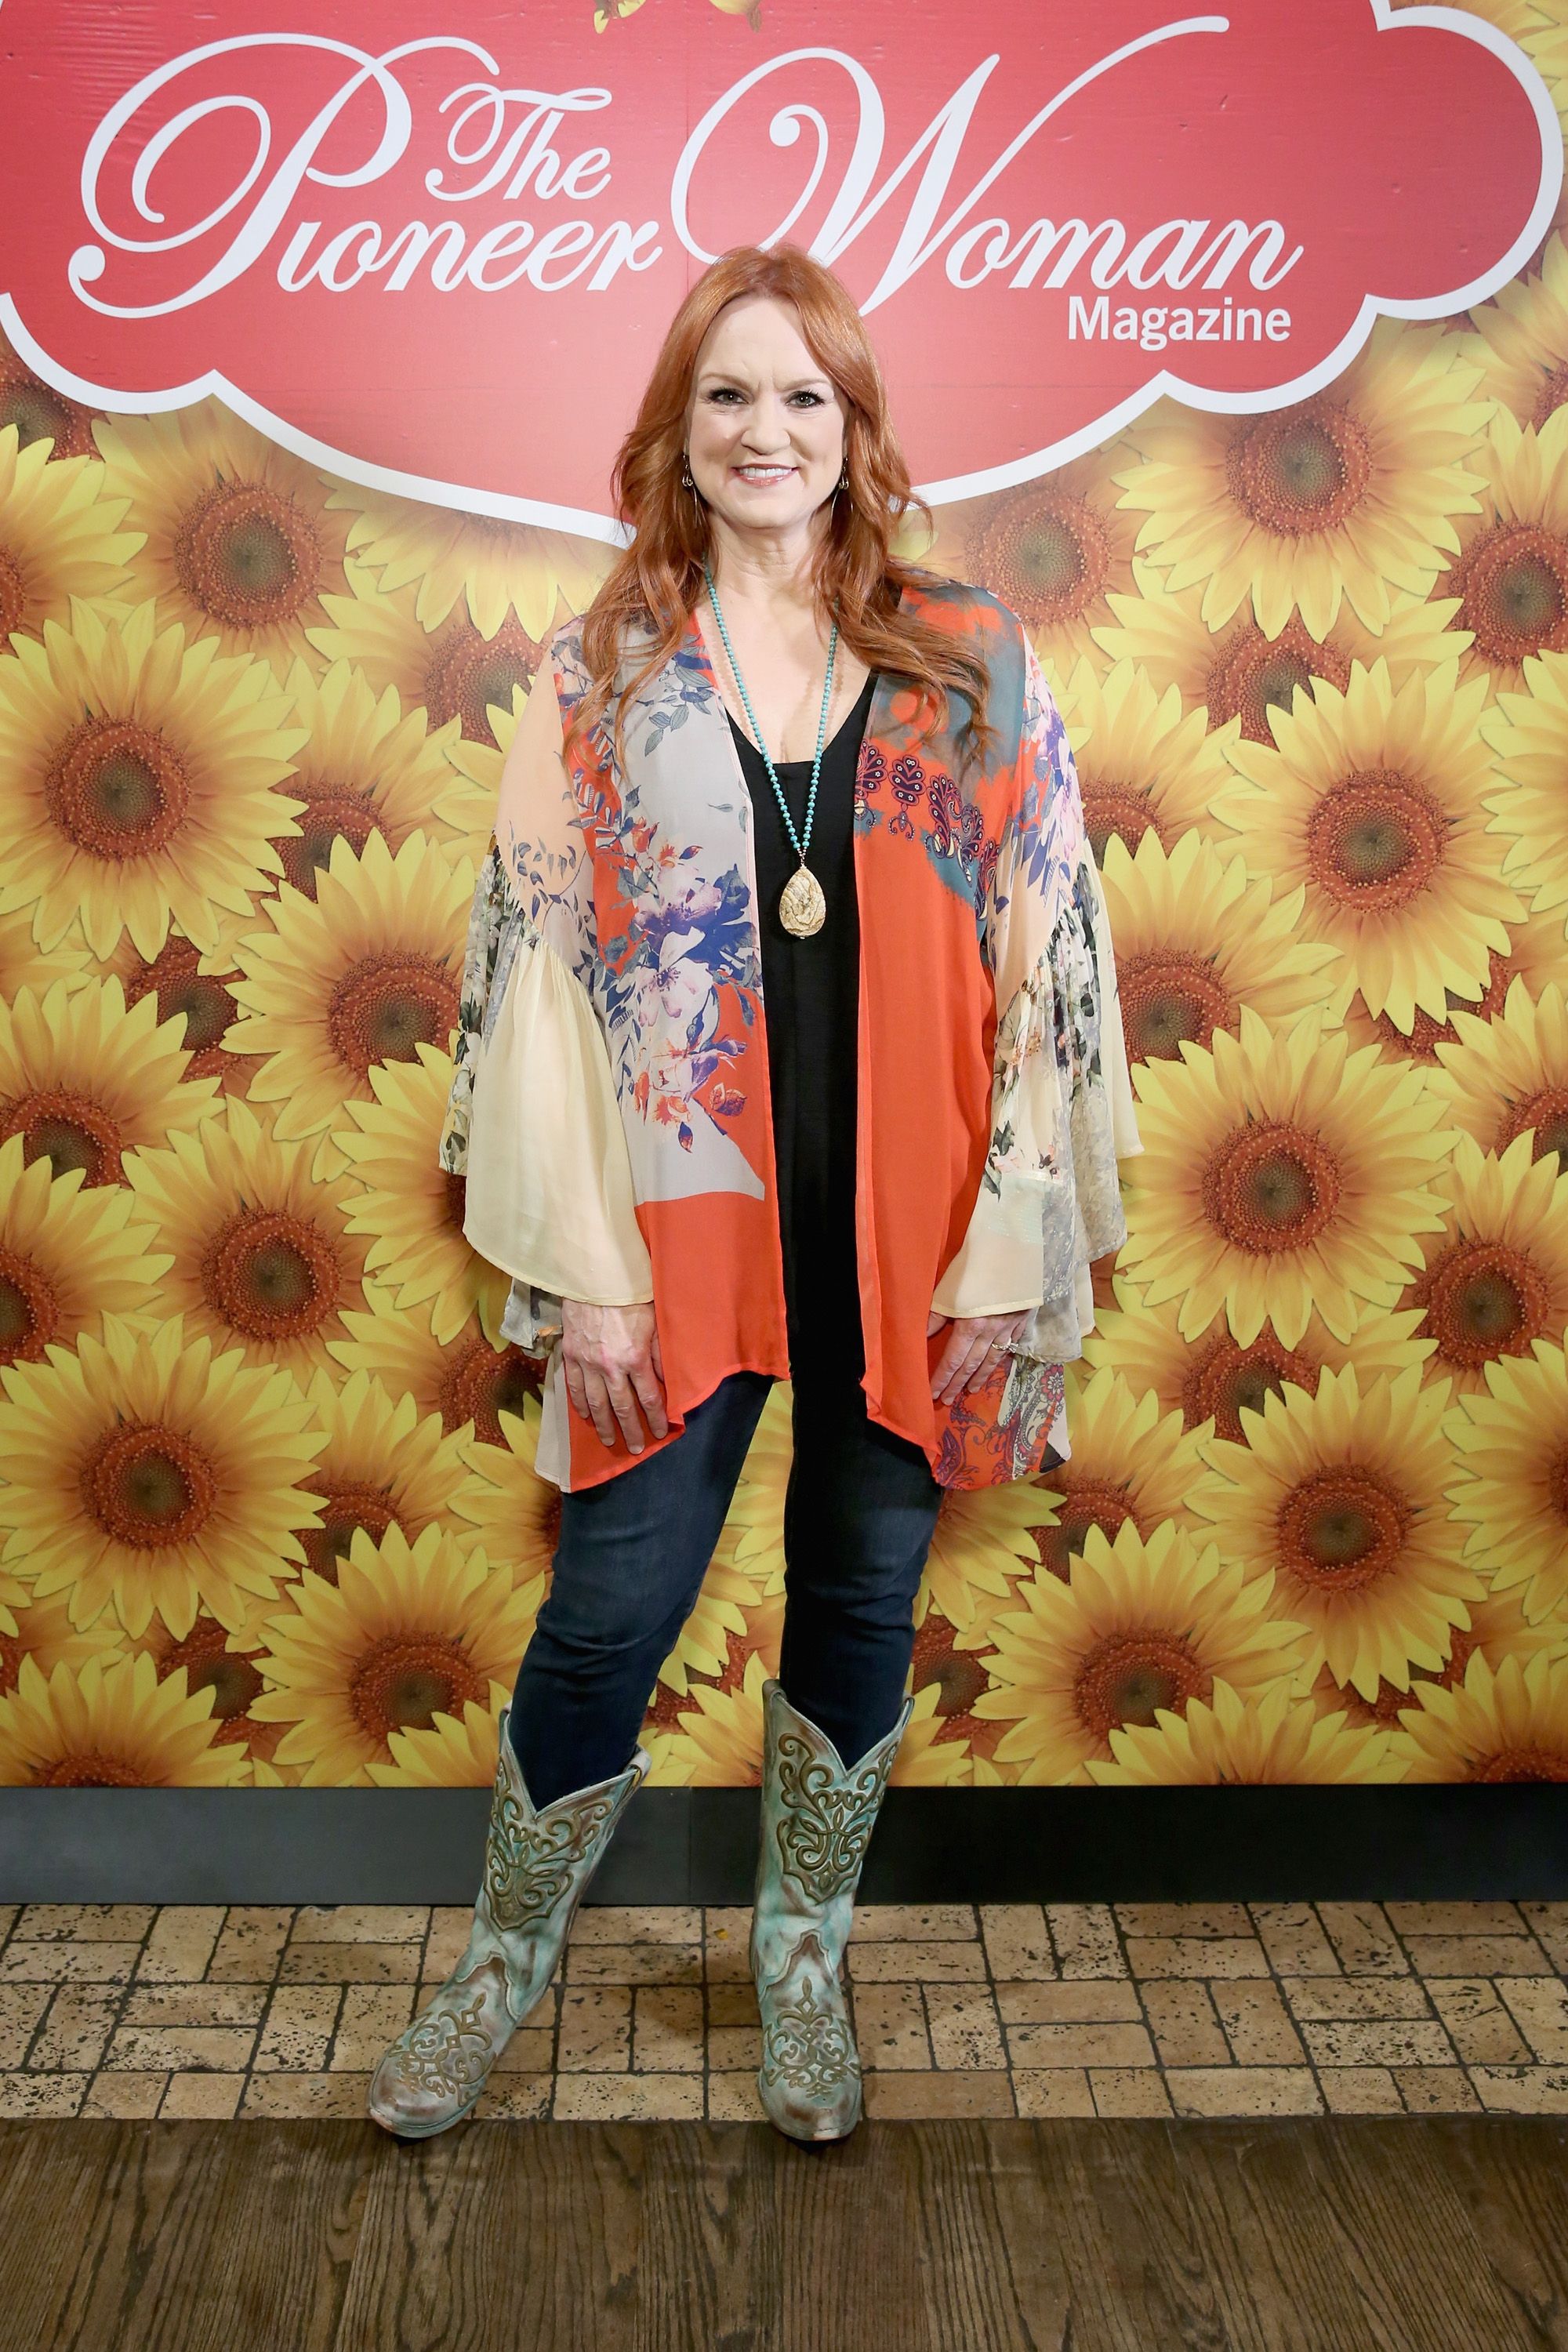 Ree Drummond at "The Pioneer Woman Magazine Celebration with Ree Drummond" on June 6, 2017, in New York City | Photo: Monica Schipper/Getty Images